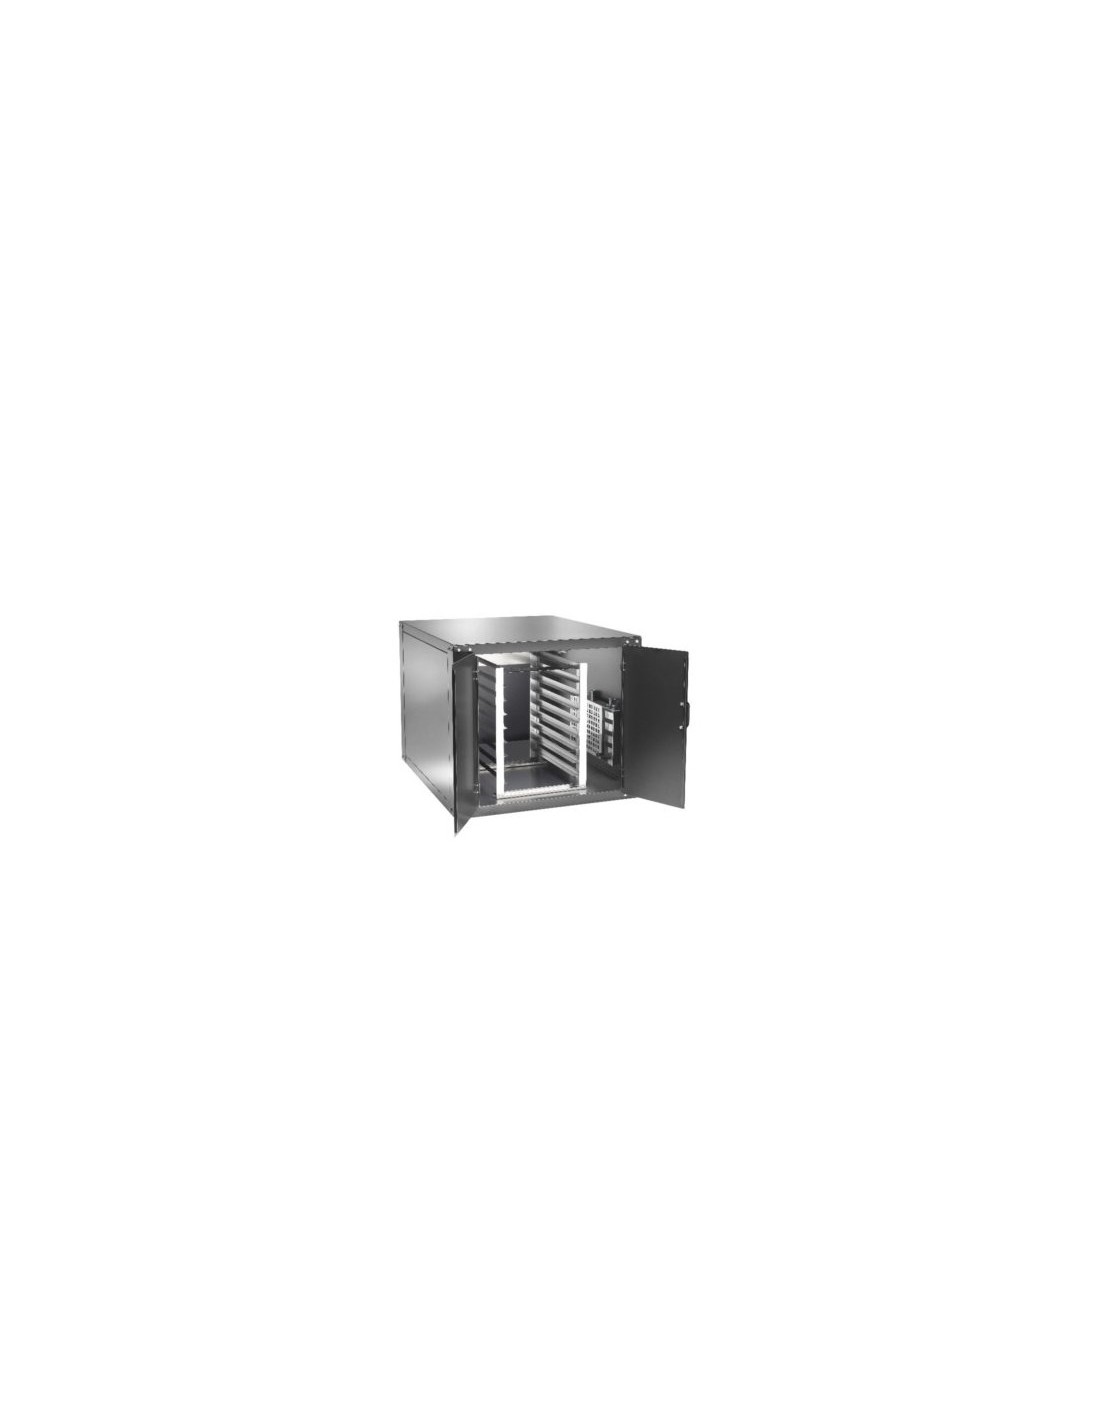 Baking chamber mod. CLFMDW6 - Capacity no. 9 pans - Temperature 0÷90°C - Power kW 1.1 - Single-phase power supply